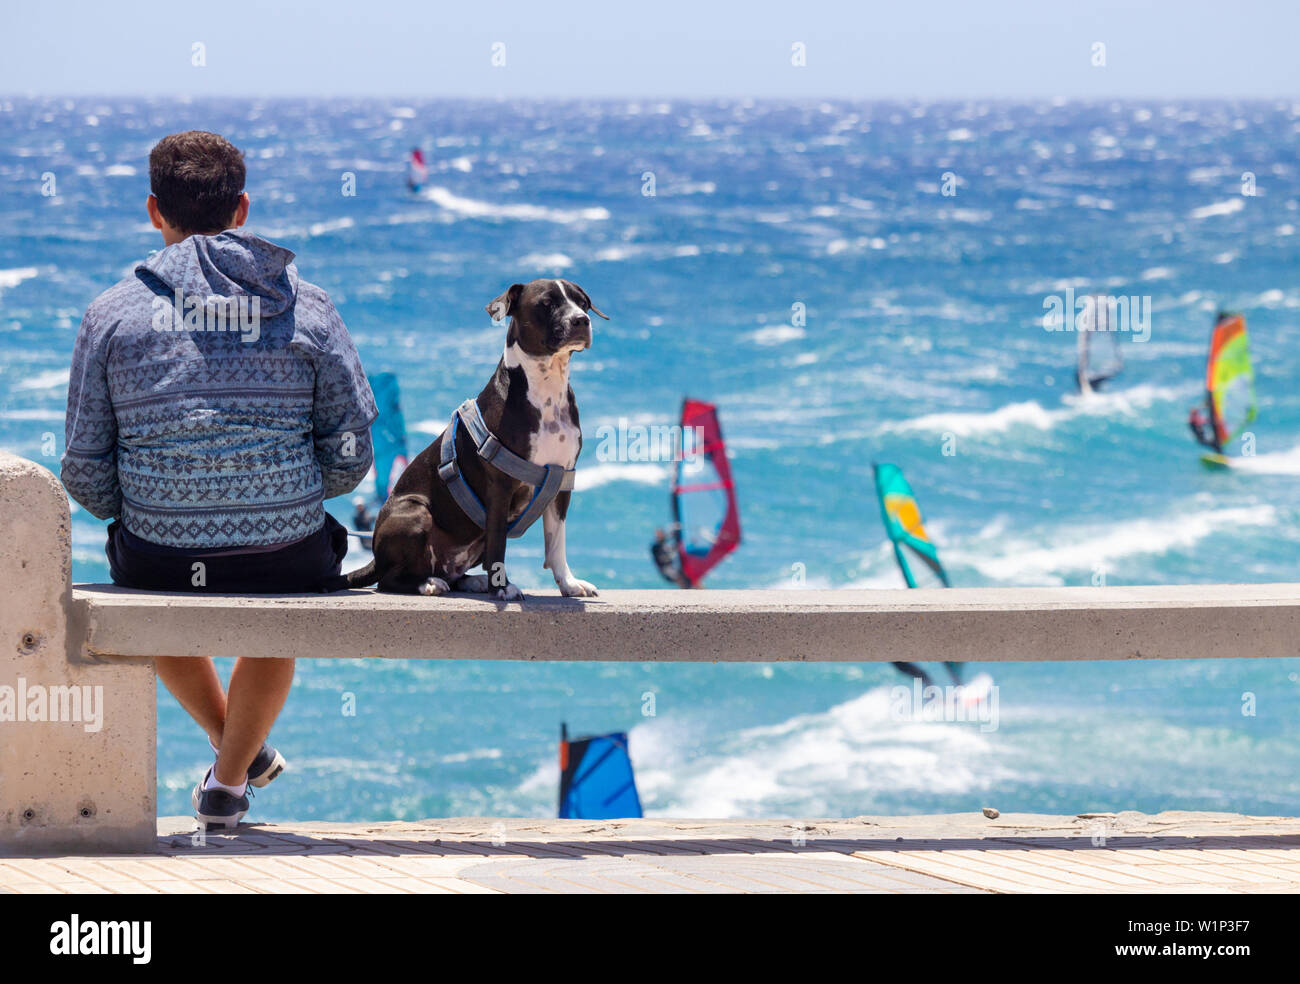 Pozo Izquierdo, Gran Canaria, Canary Islands, Spain. 3rd July 2019. Windsurfing in 50 knots of wind. One man and his dog watch the the world`s best wave sailors as they start arriving in Pozo Izquierdo on Gran Canaria ahead of the first leg of the PWA (Professional Windsurfers Association) 2019 world wave sailing championship tour which starts on 12th July. Pozo is famed, and feared by many, for its howling 50 knot summer winds. Credit:Alan Dawson/Alamy Live News. Stock Photo